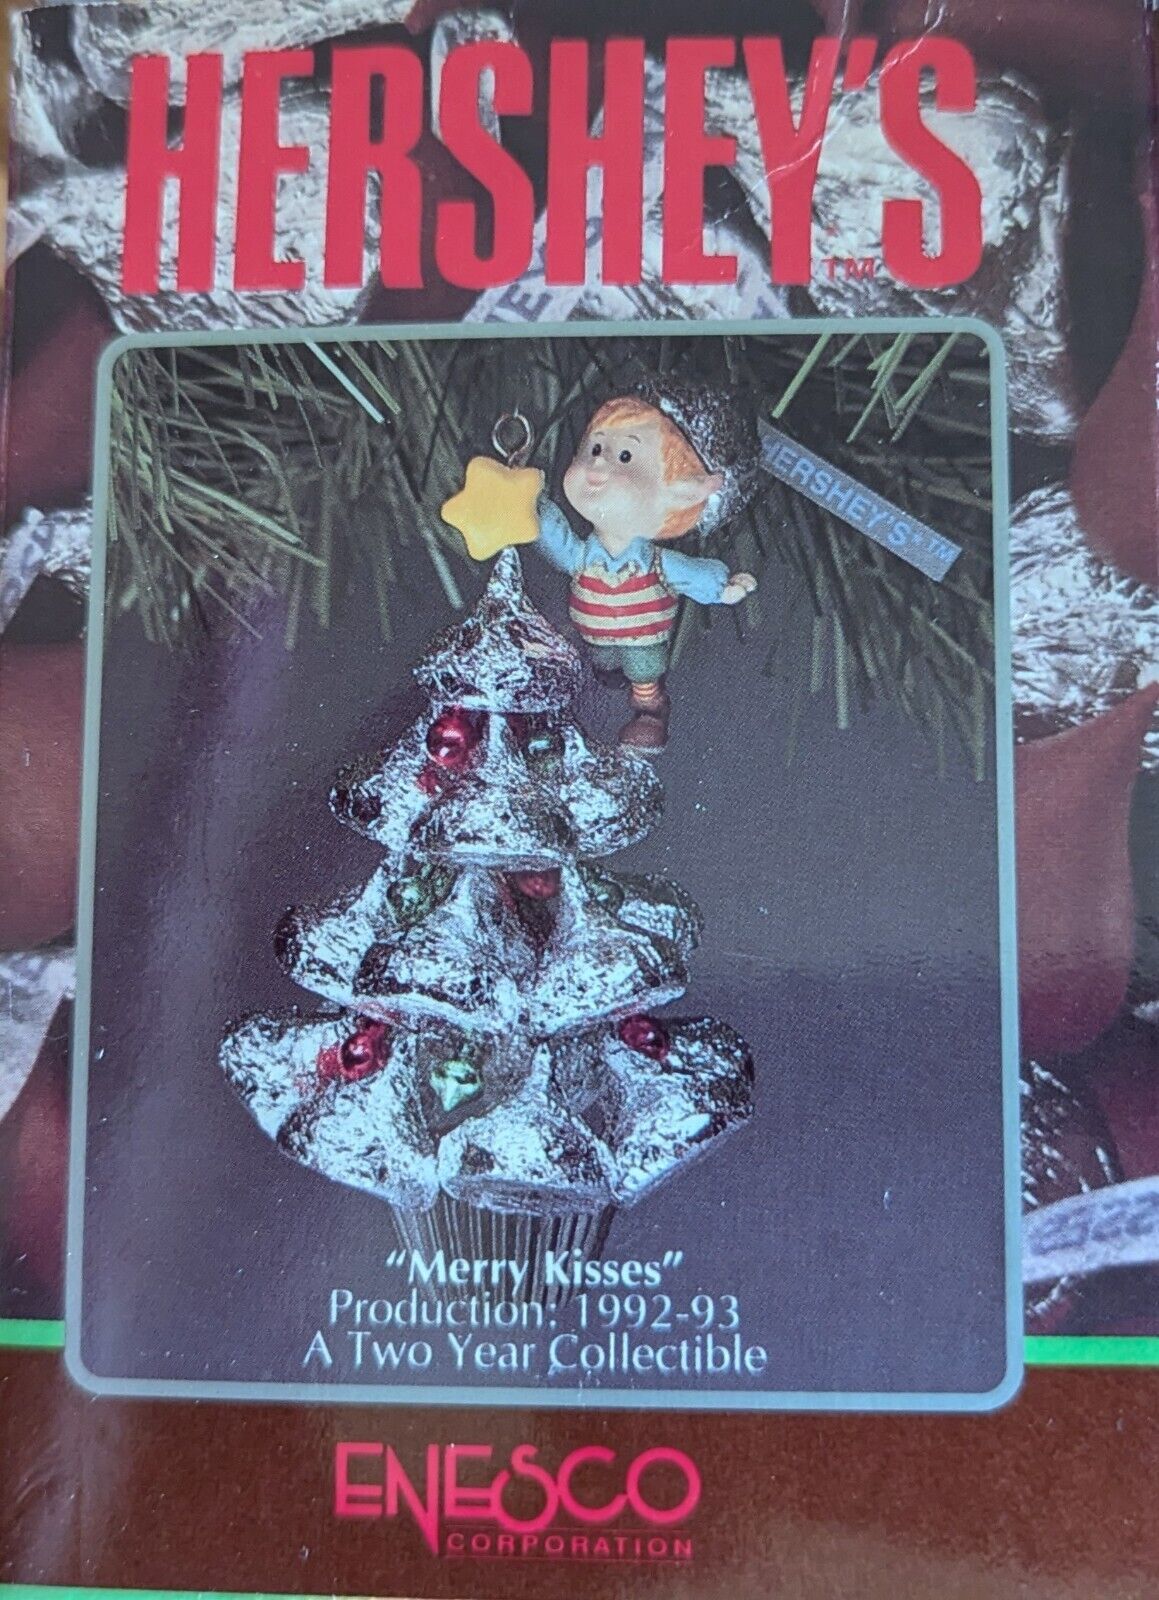  Hershey\'s Merry Kisses Ornament, Tree Elf Star,Produced 1992- 93 Limited ED.